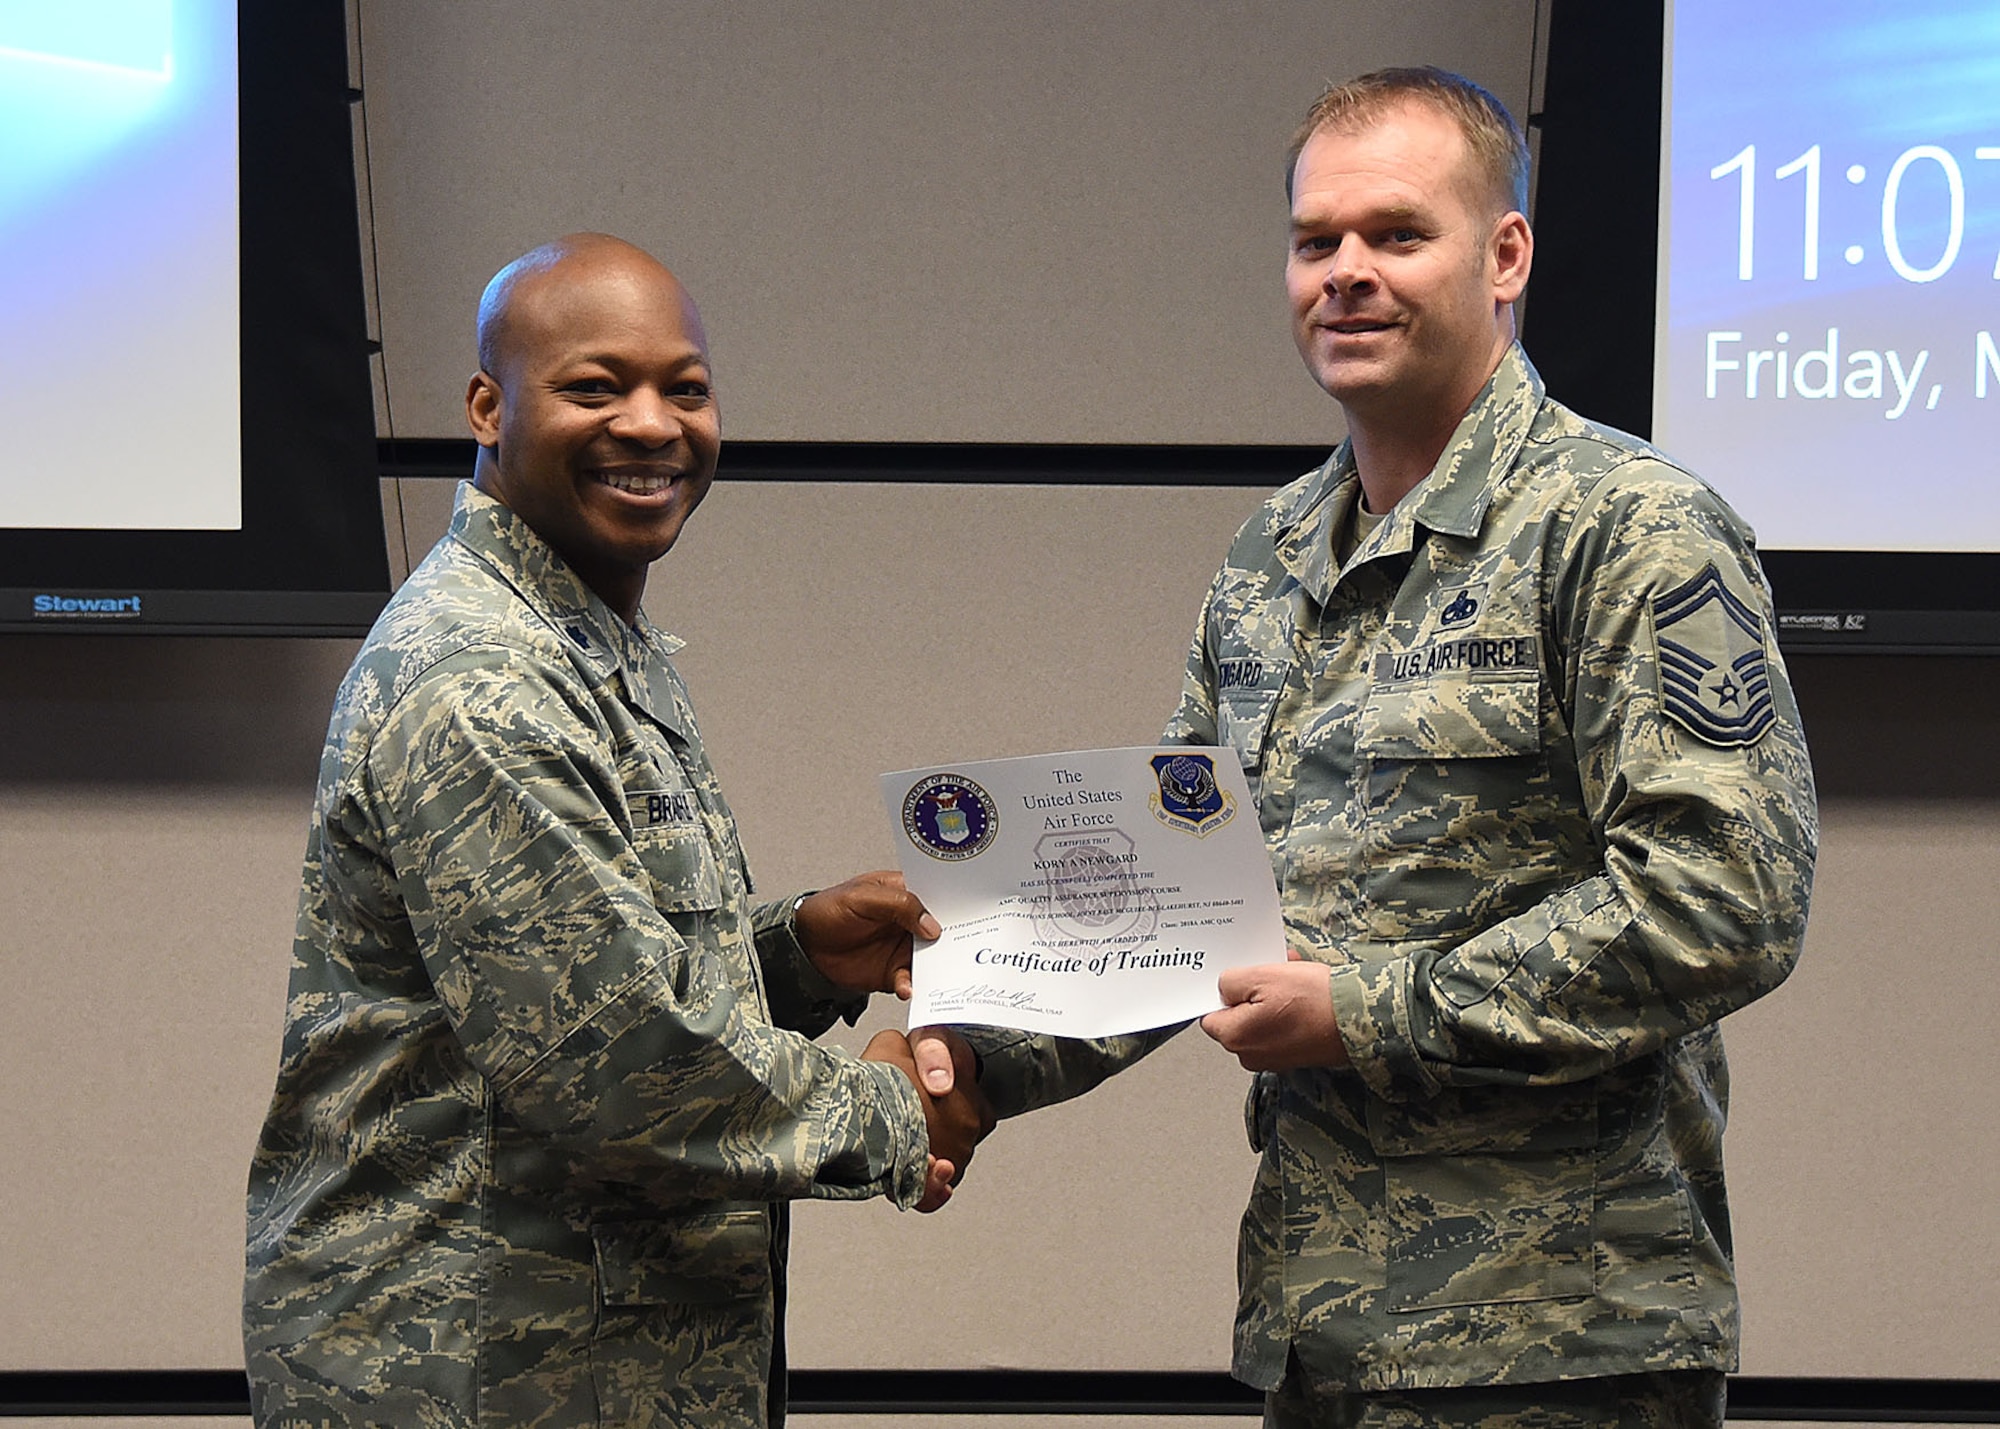 Lt. Col. Patrick Brady-Lee, 423rd Mobility Training Squadron commander, presents Senior Master Sgt. Kory Newgard, 521st Air Mobility Operations Group superintendent, a certificate of completion for the AMC Quality Assurance Supervision course, at Joint Base McGuire-Dix-Lakehurst, March 2, 2018. The course was designed to address trending deficiencies in quality assurance supervision by enhancing student’s knowledge in executing the roles and responsibilities of QA superintendents and chief inspectors. (U.S. Air Force photo by Tech. Sgt. Jamie Powell)